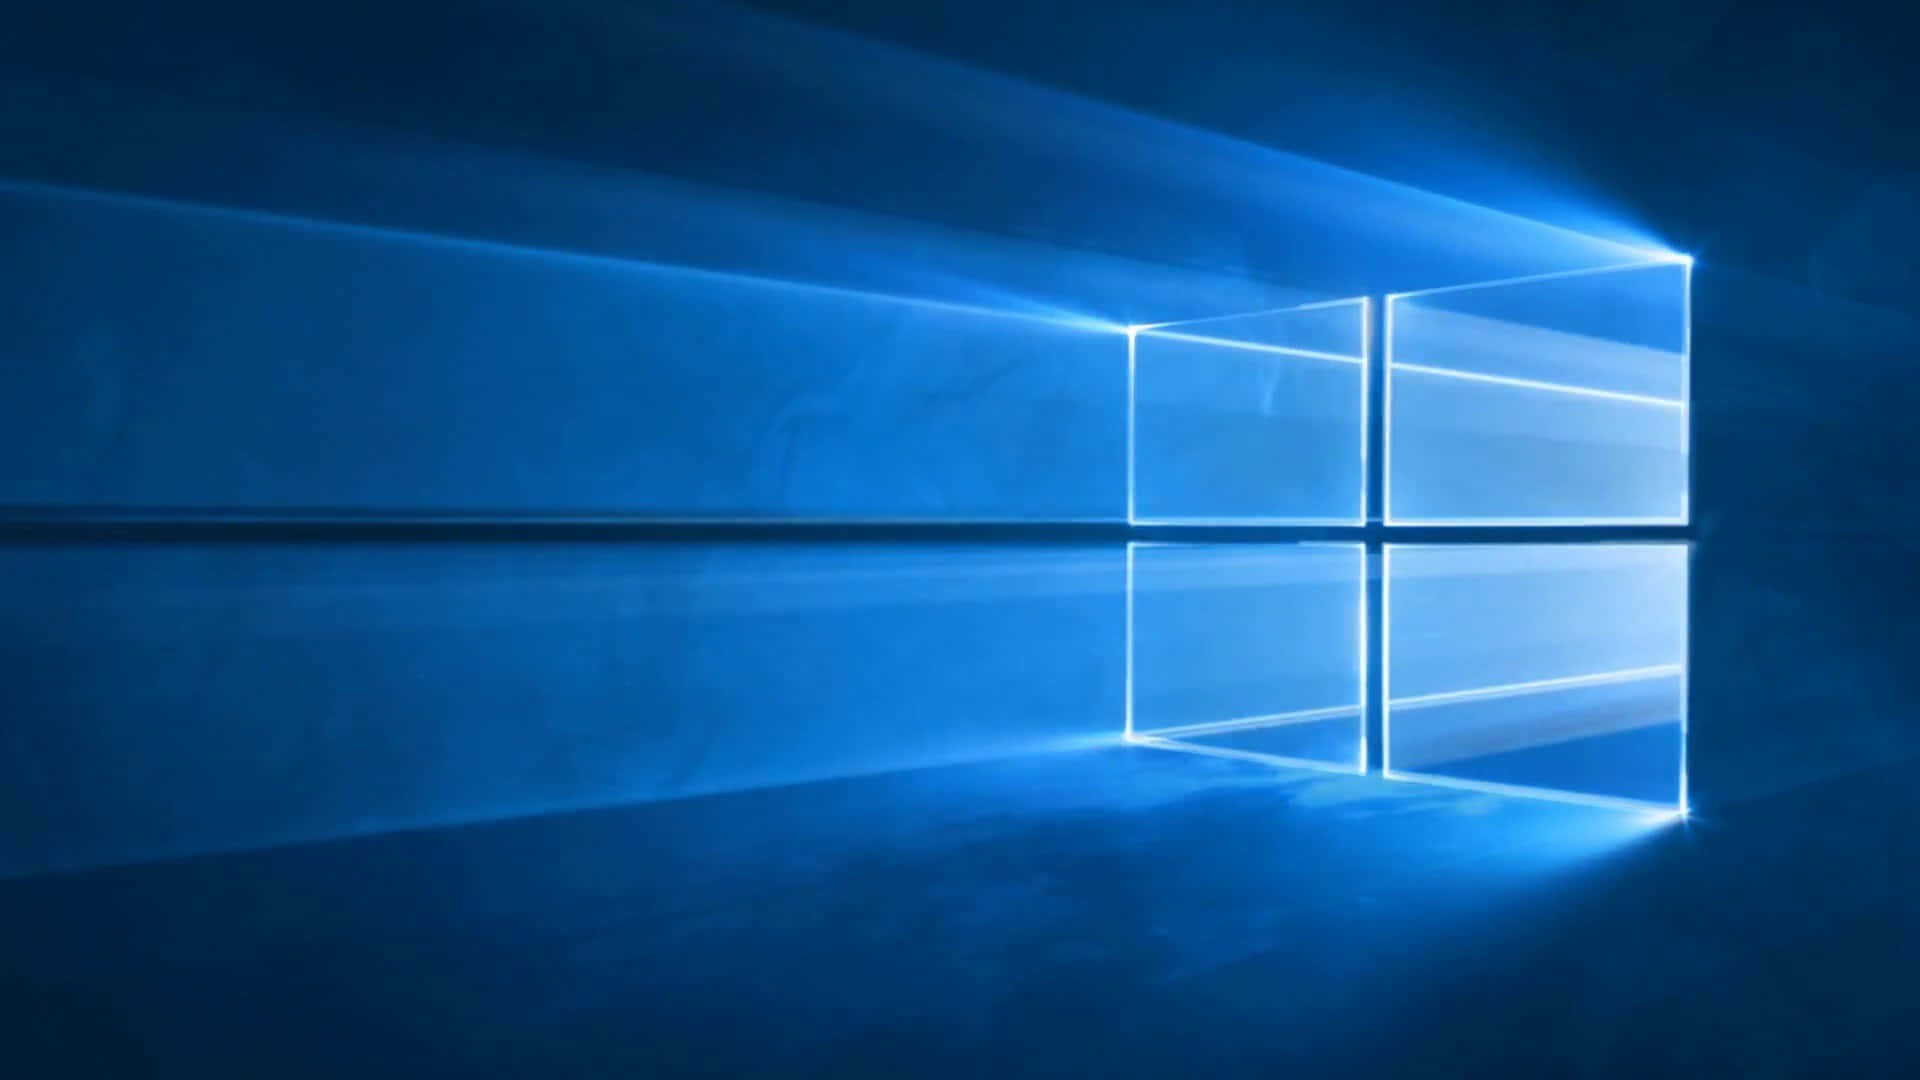 Windows 10 - A Blue Window With Light Coming Through Background